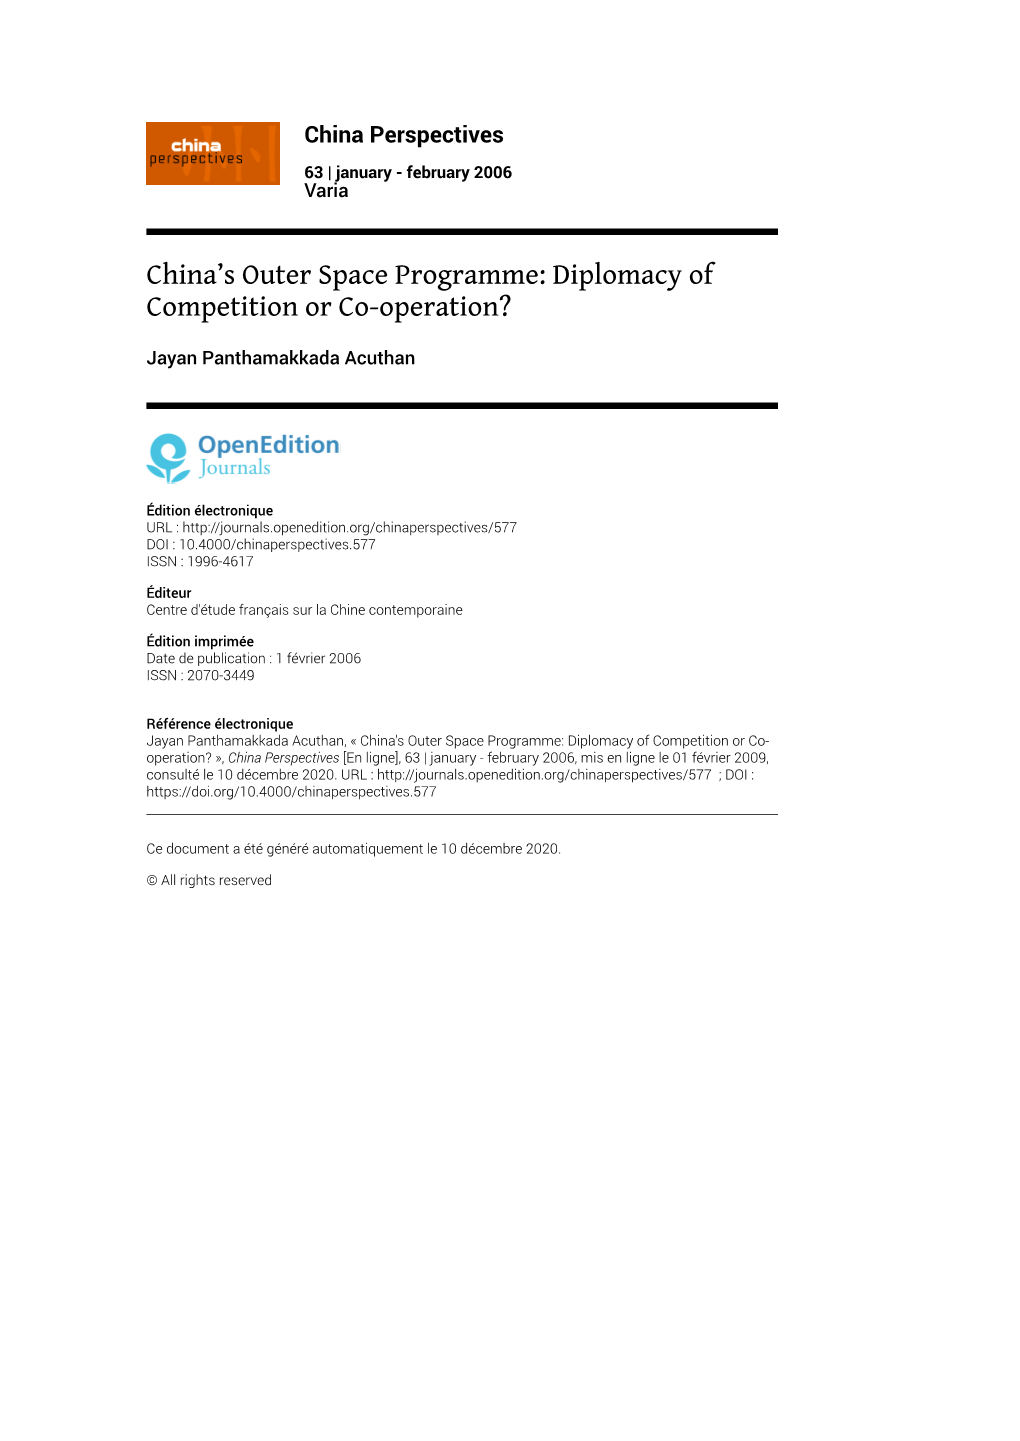 China Perspectives, 63 | January - February 2006 China’S Outer Space Programme: Diplomacy of Competition Or Co-Operation? 2